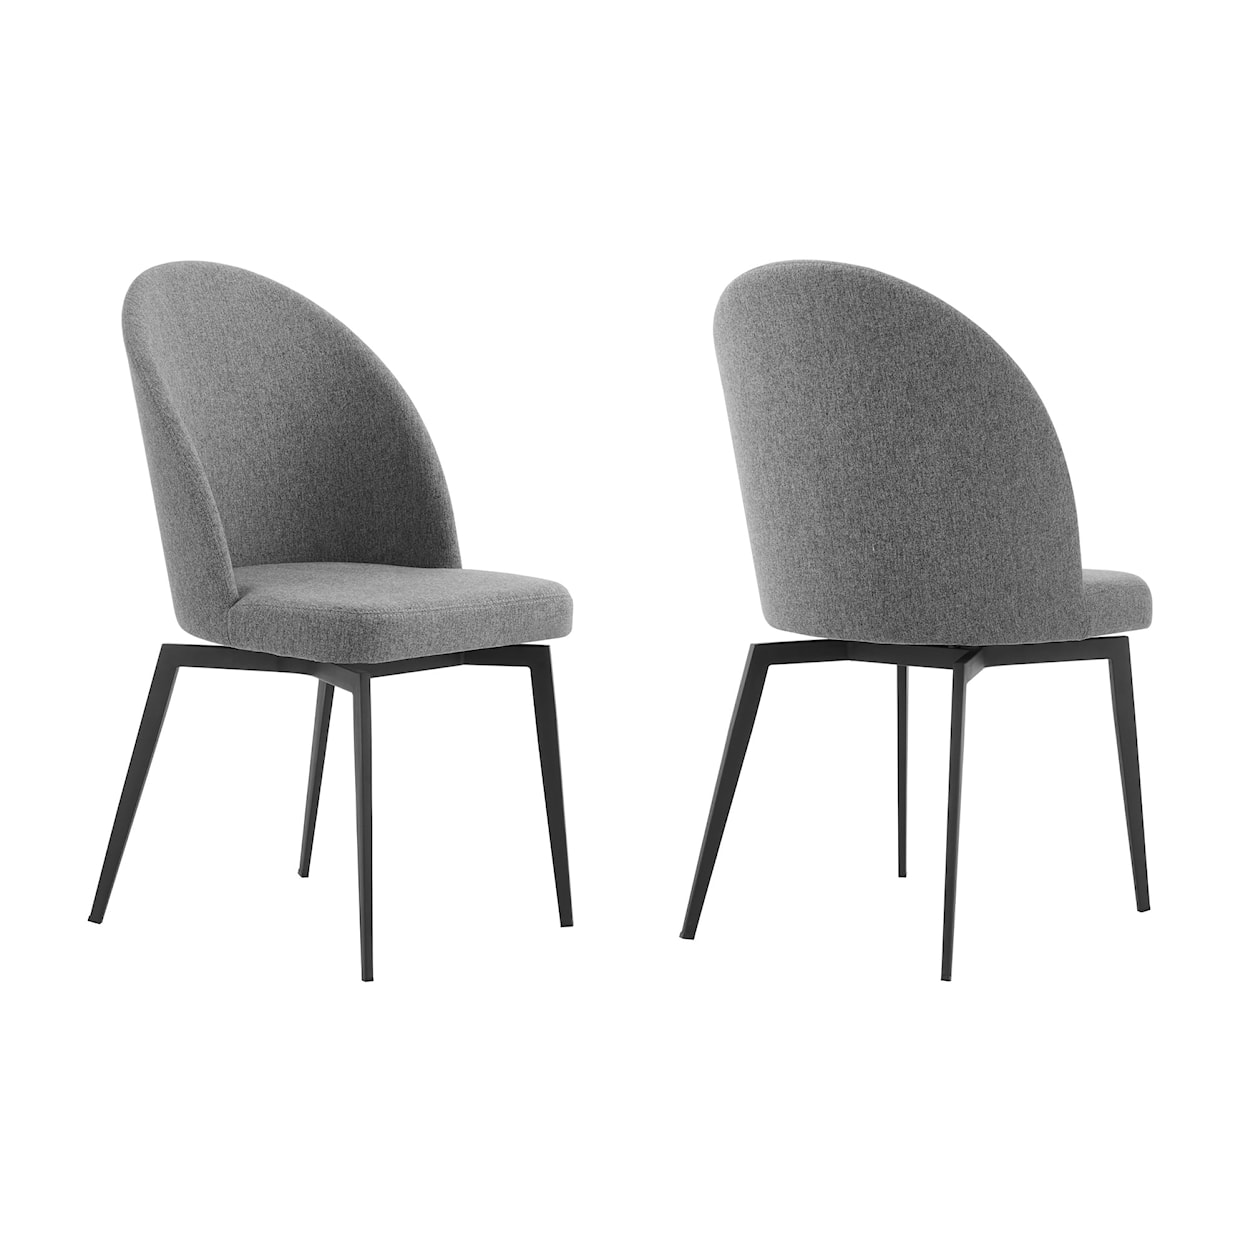 Armen Living Sunny Set of 2 Dining Chairs